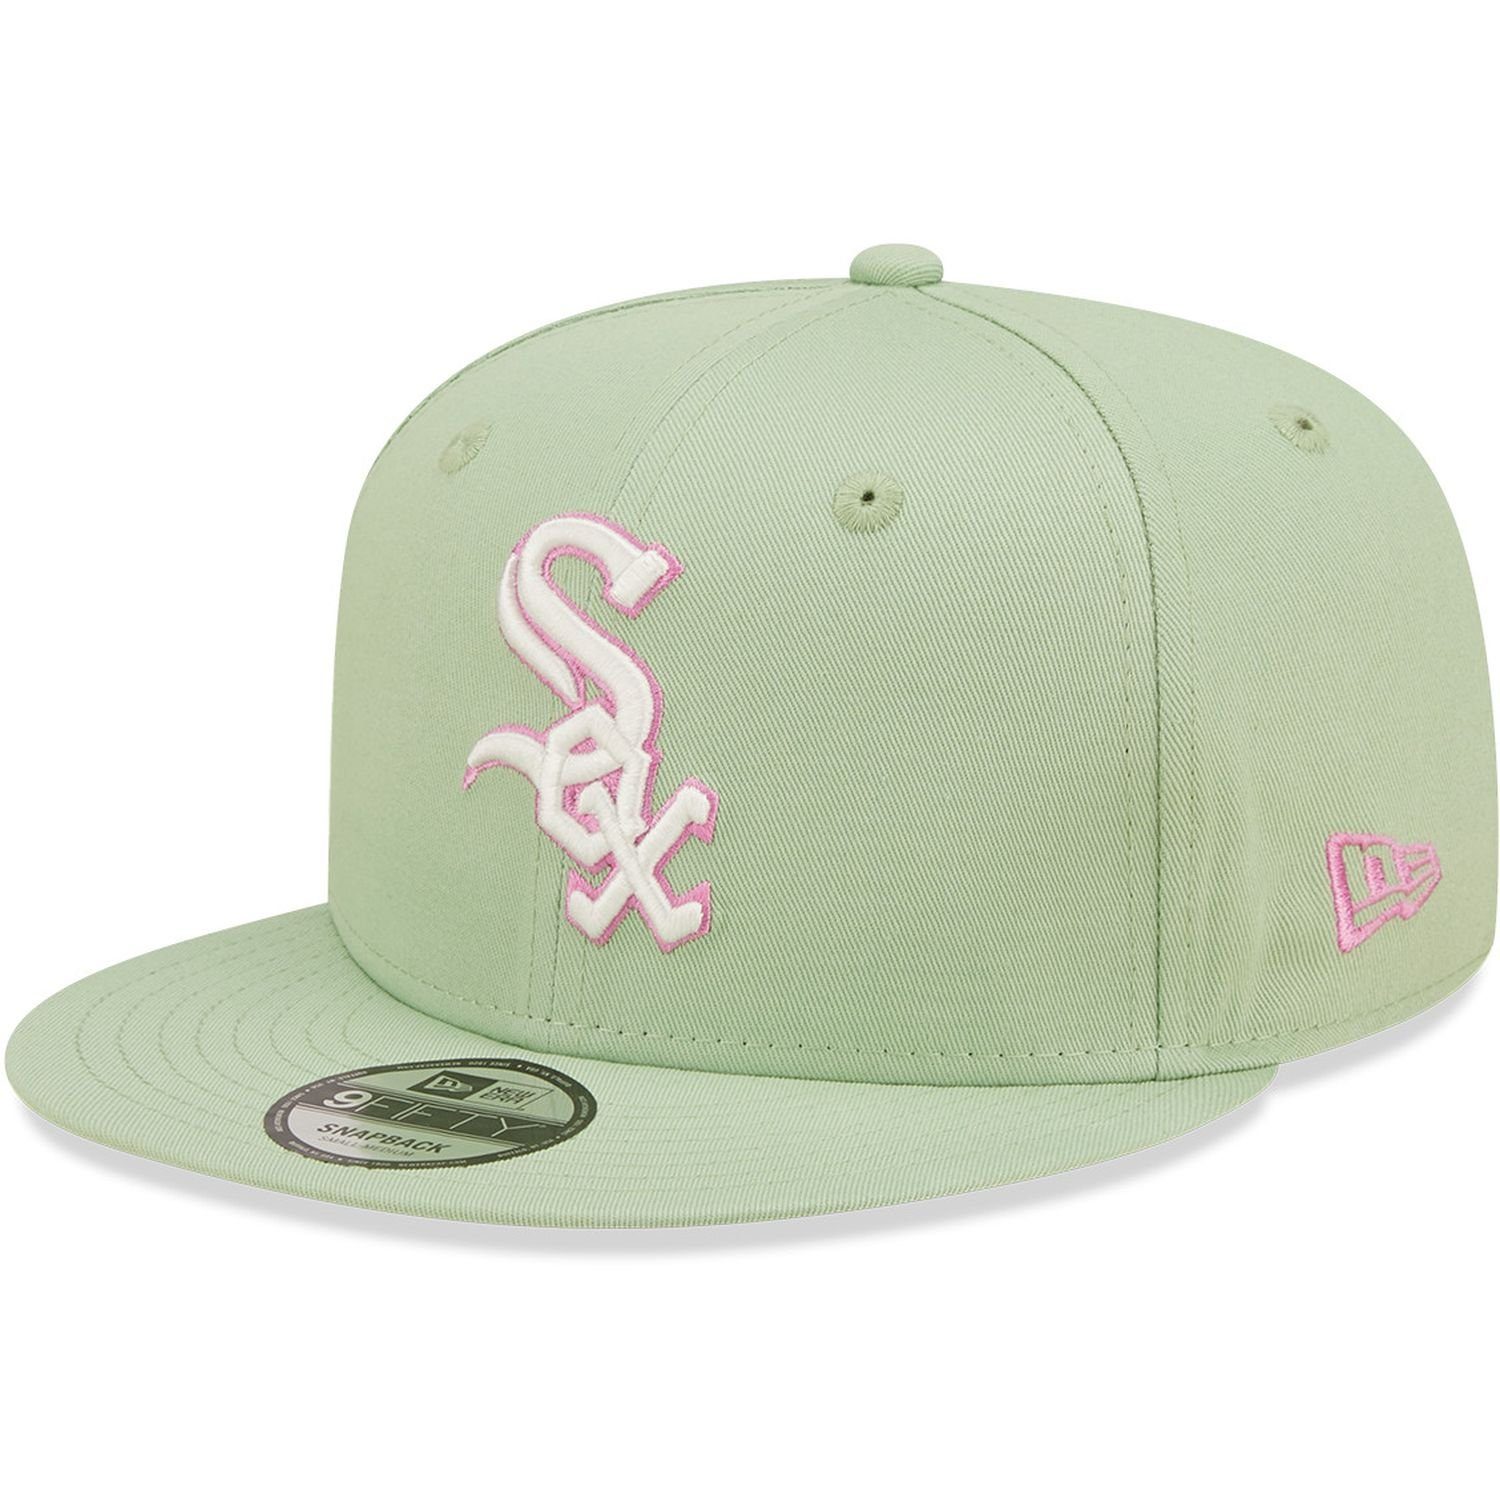 New Era Sox Snapback Cap 9Fifty White PATCH Chicago